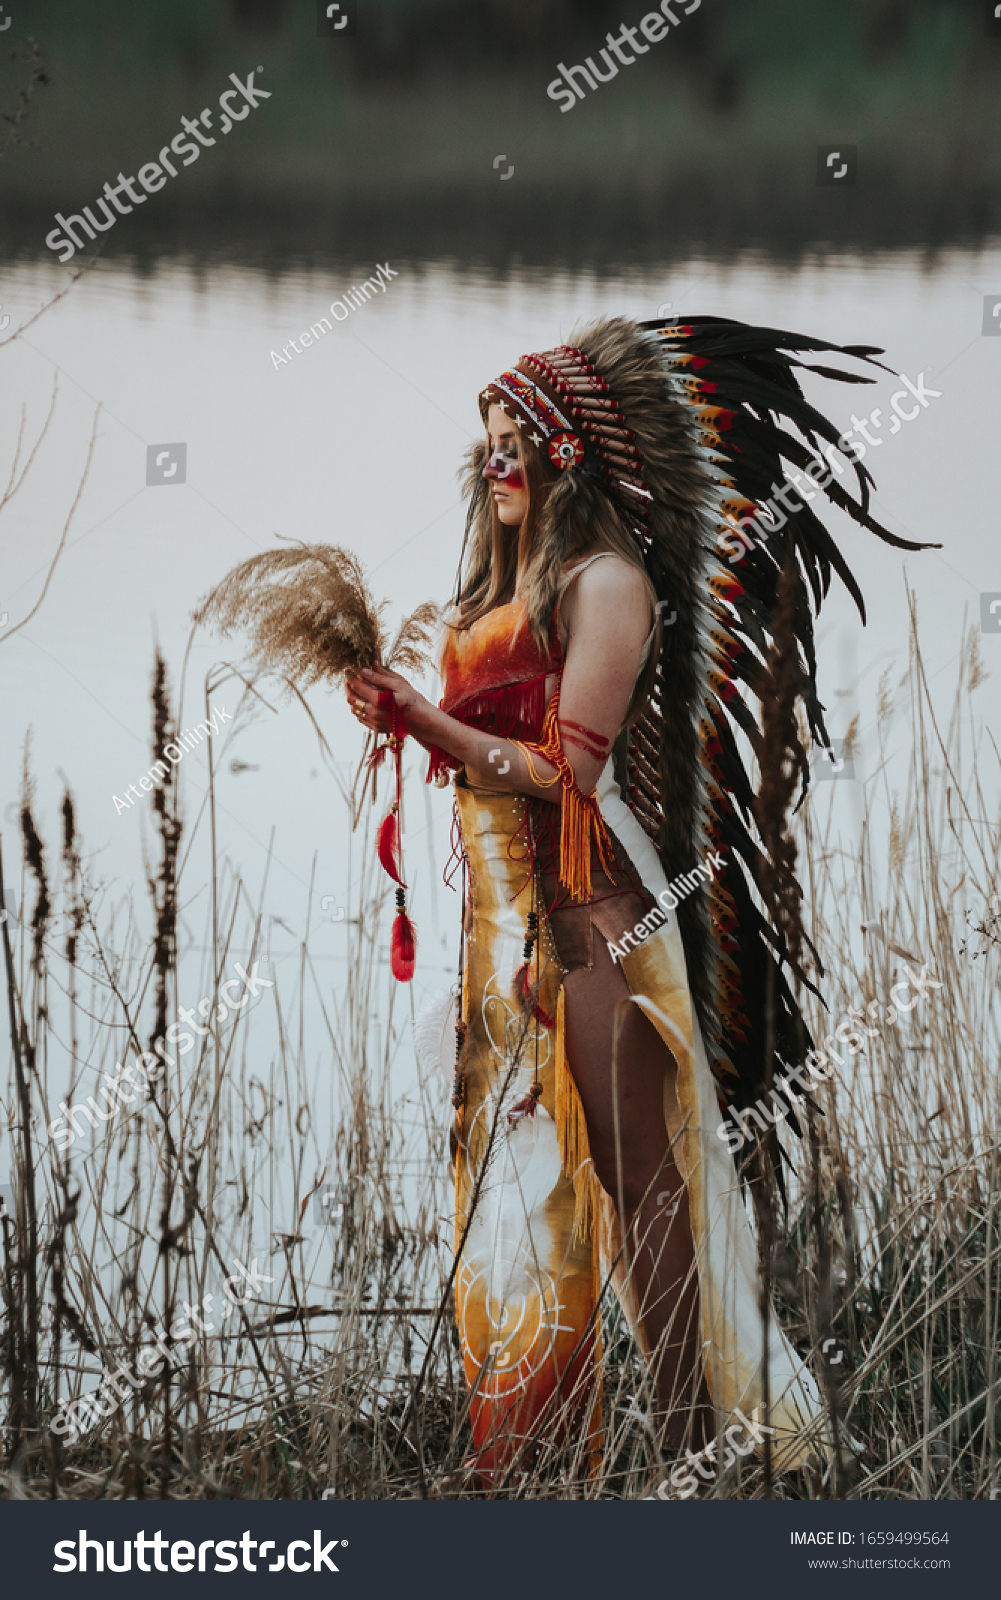 A girl dressed as a Native American with herbs in hands stands on the bank of the river #1659499564